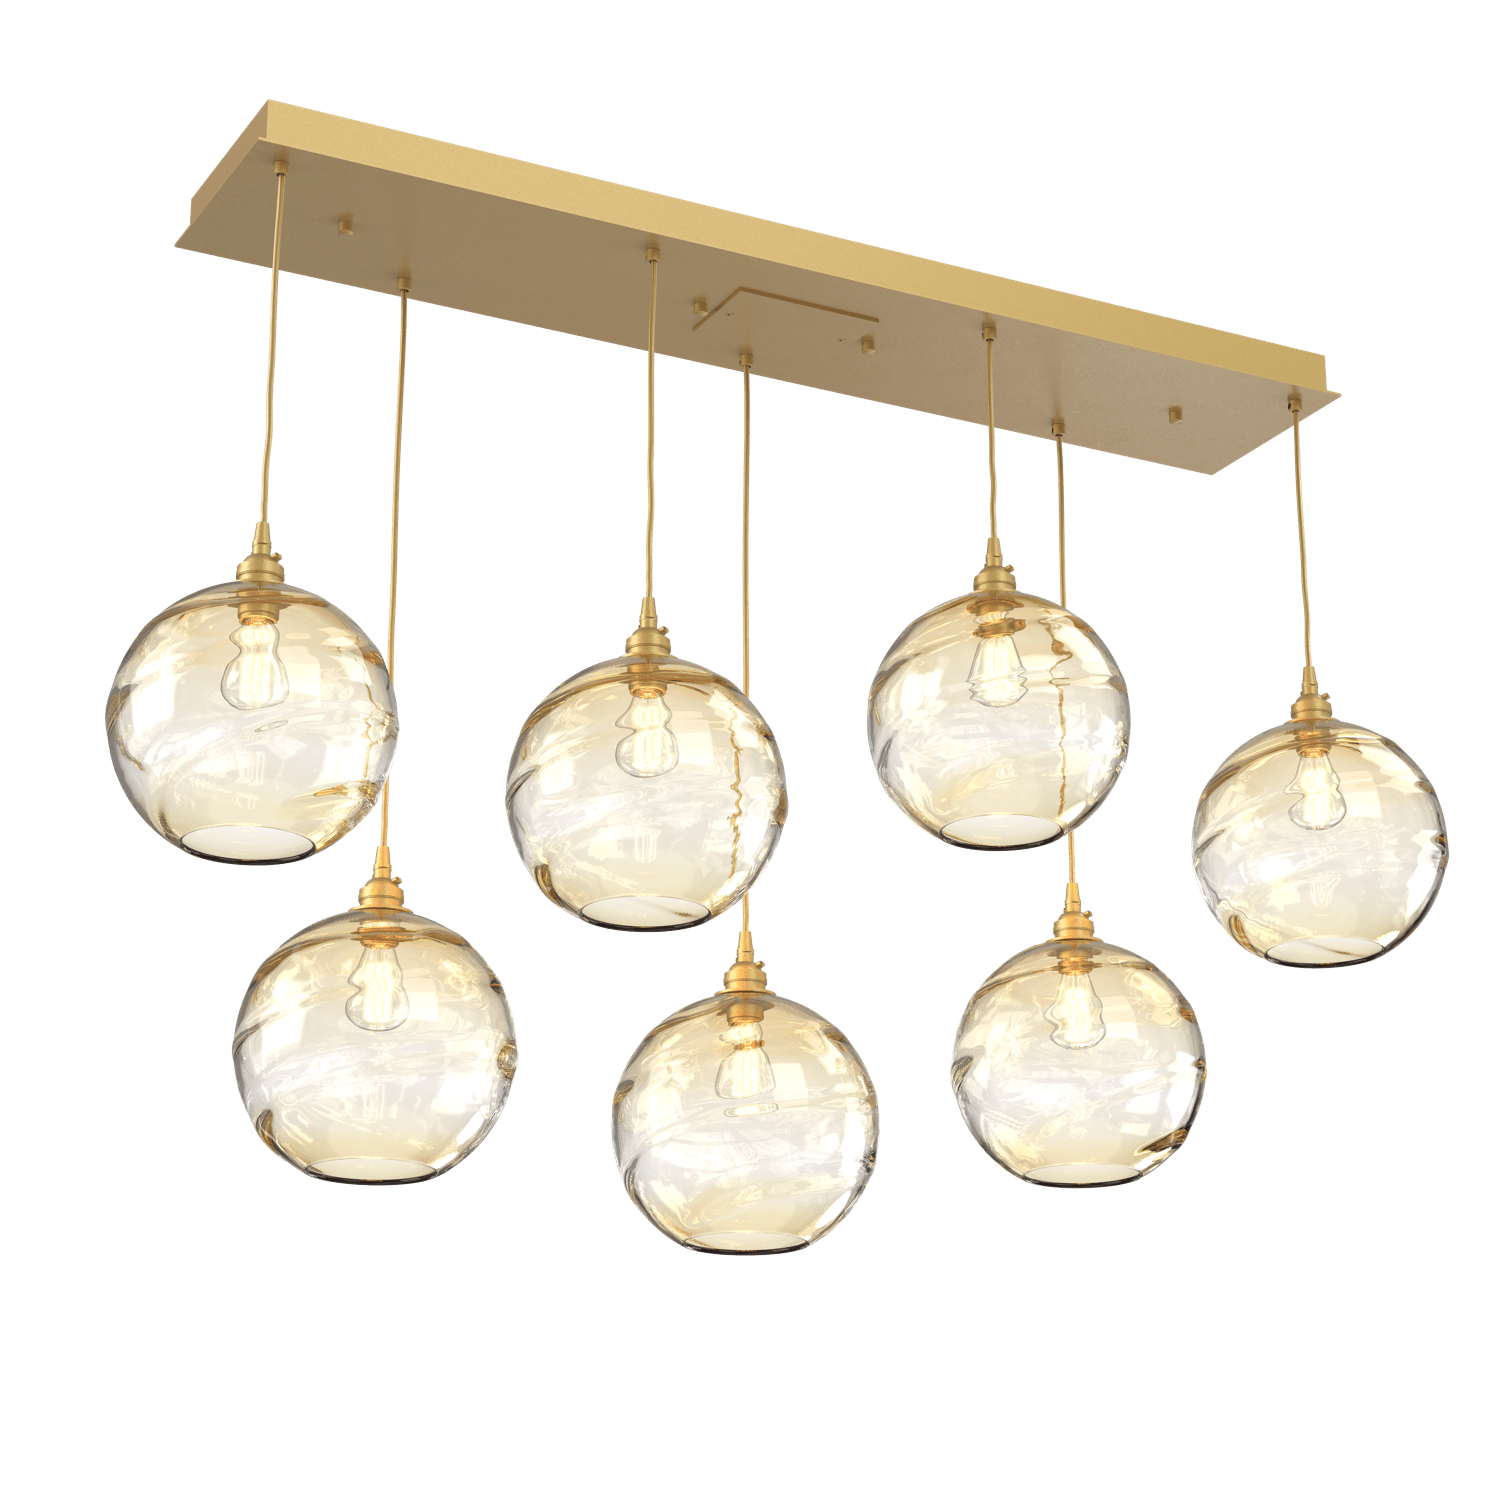 PLB0047-07-GB-OA-Hammerton-Studio-Optic-Blown-Glass-Terra-7-light-linear-pendant-chandelier-with-gilded-brass-finish-and-optic-amber-blown-glass-shades-and-incandescent-lamping